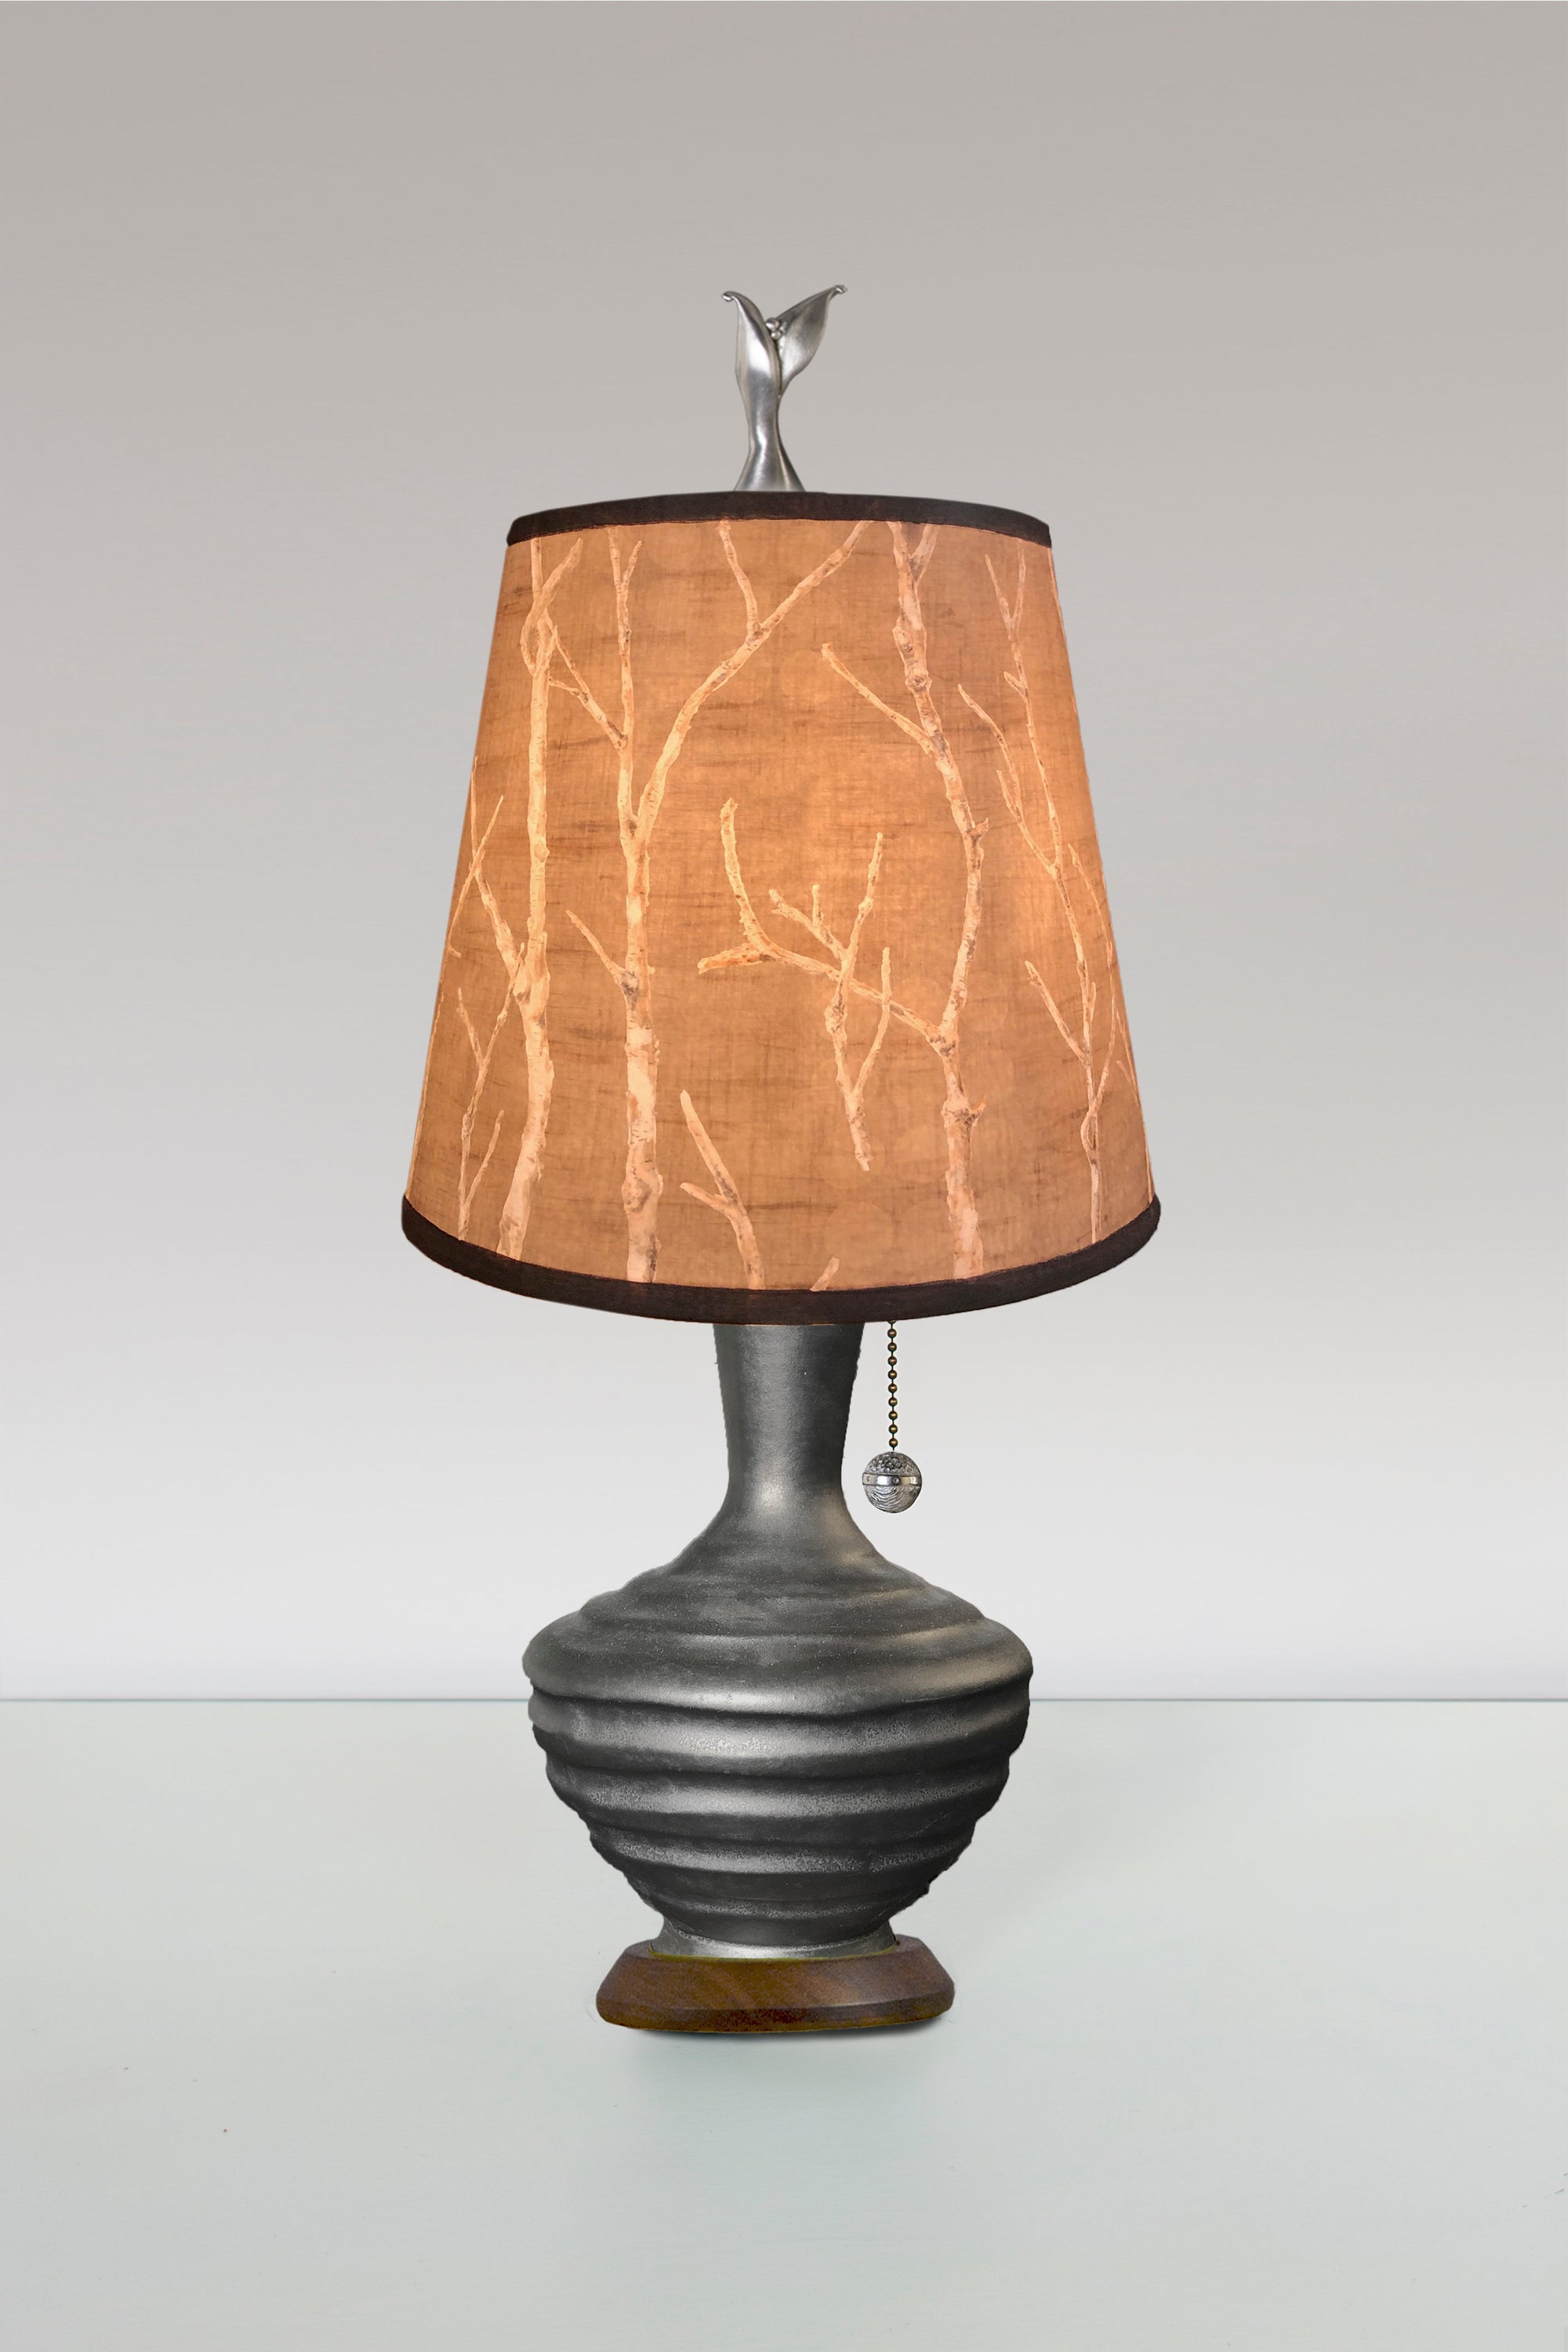 Janna Ugone & Co Table Lamps Ceramic Table Lamp with Small Drum Shade in Twigs